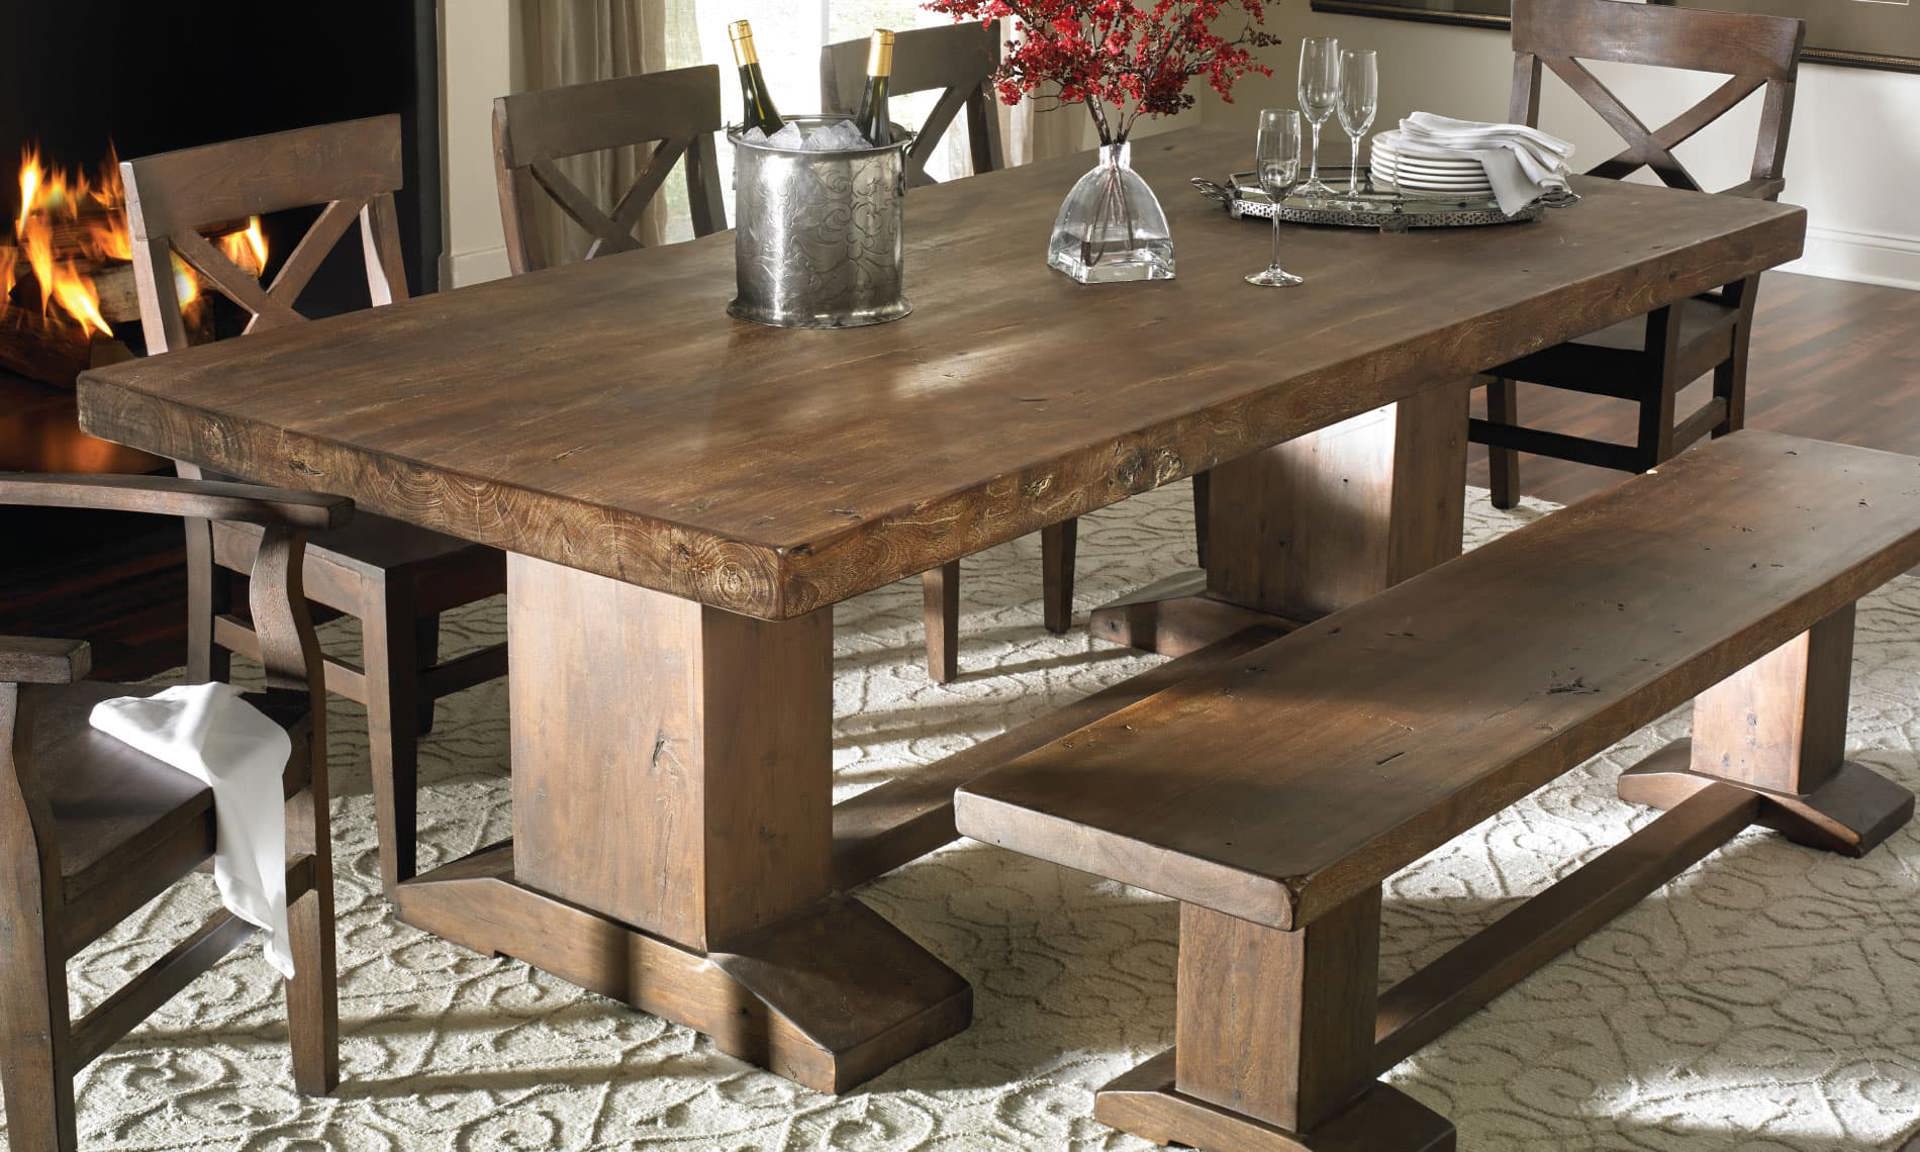 Dining table made of solid wood.